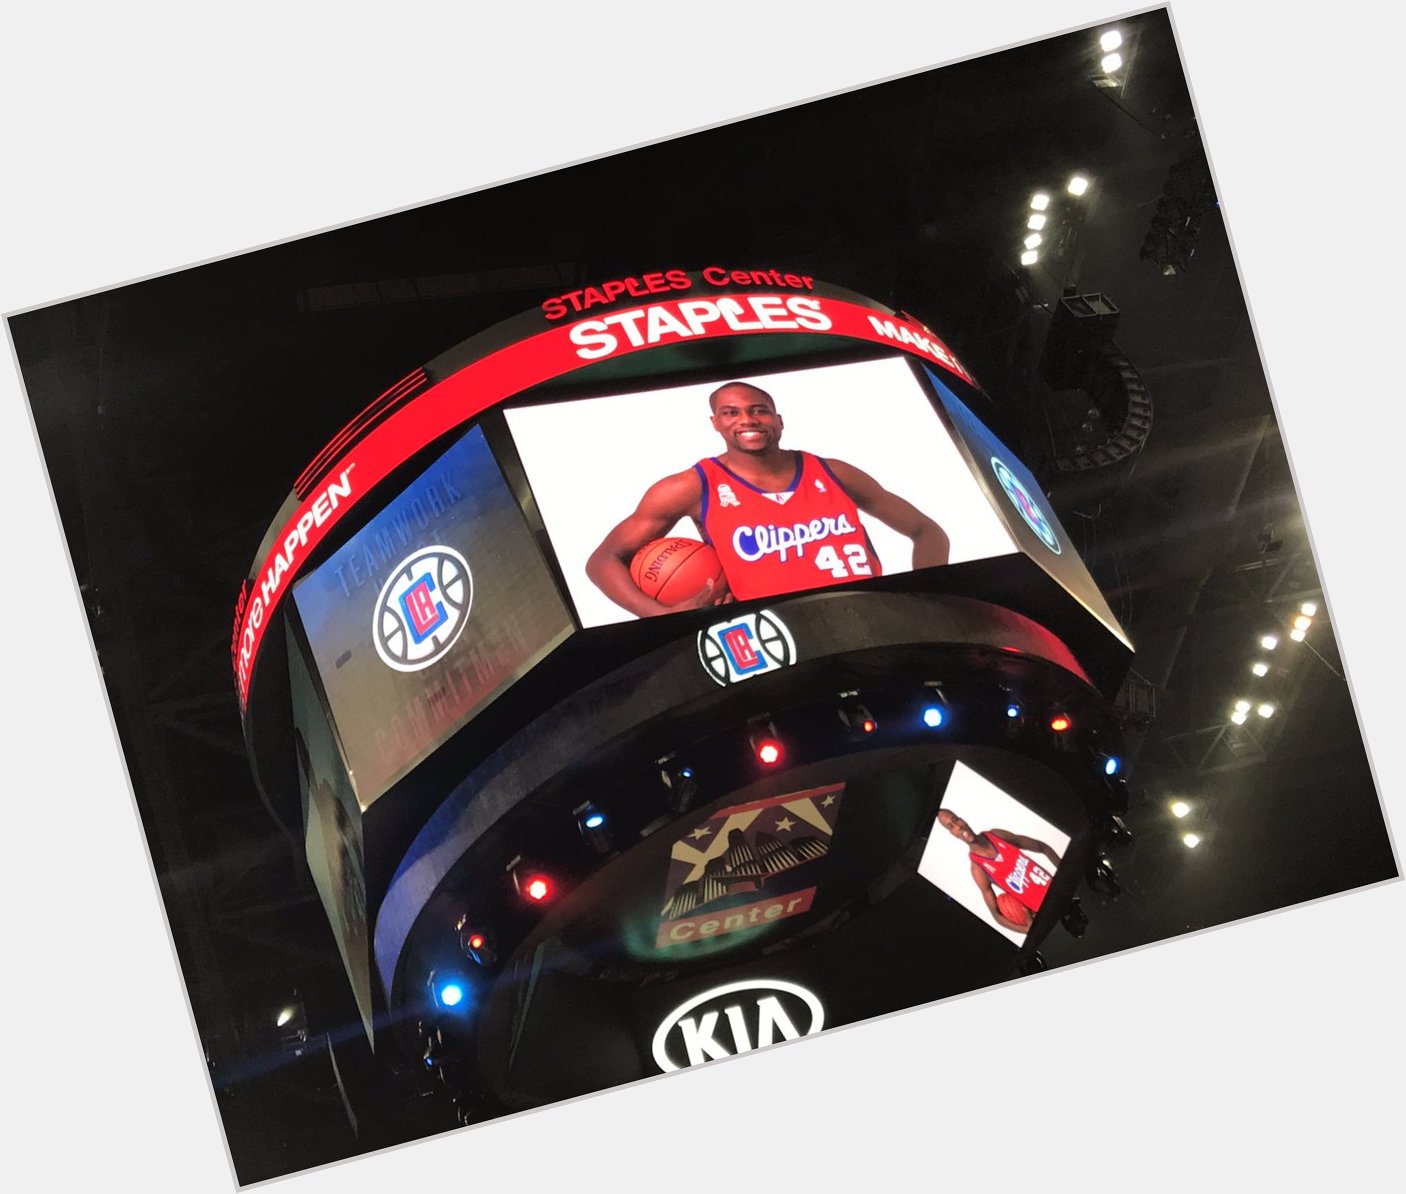 Elton Brand was introduced at the Clippers game. They also wished him Happy Birthday. 